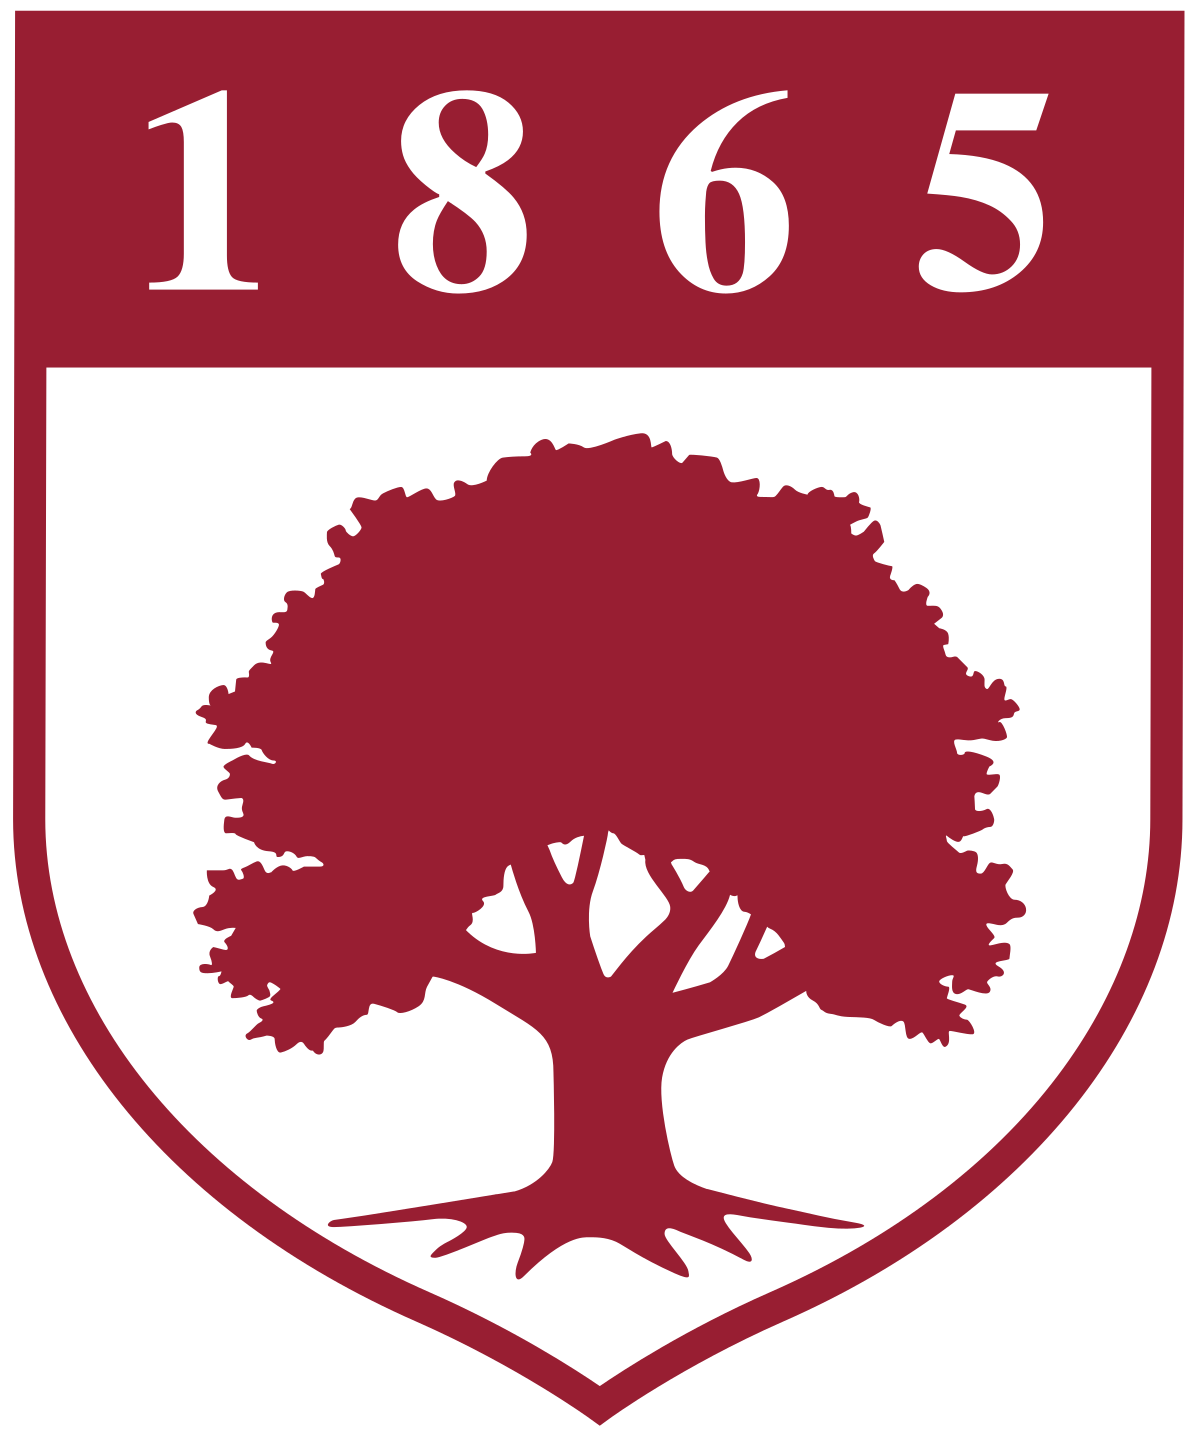 A logo of Rider University for our school profile